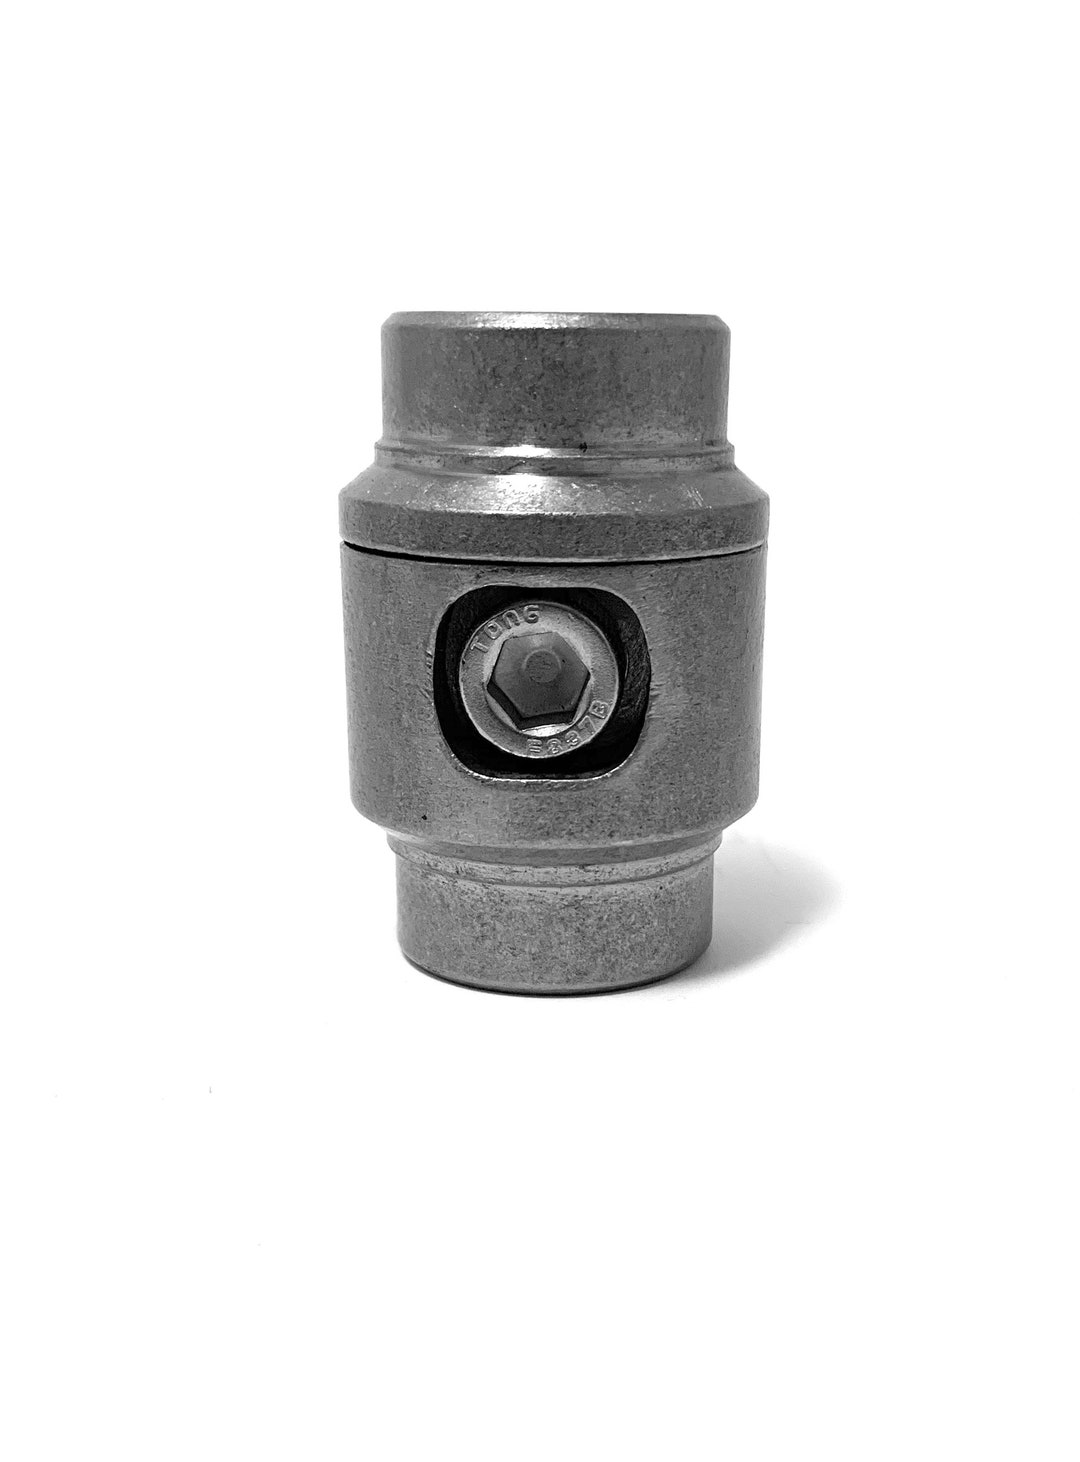 Buy 1-1/4 Weld in Interlocking Tube Connectors Adapter Roll Online in India  Etsy